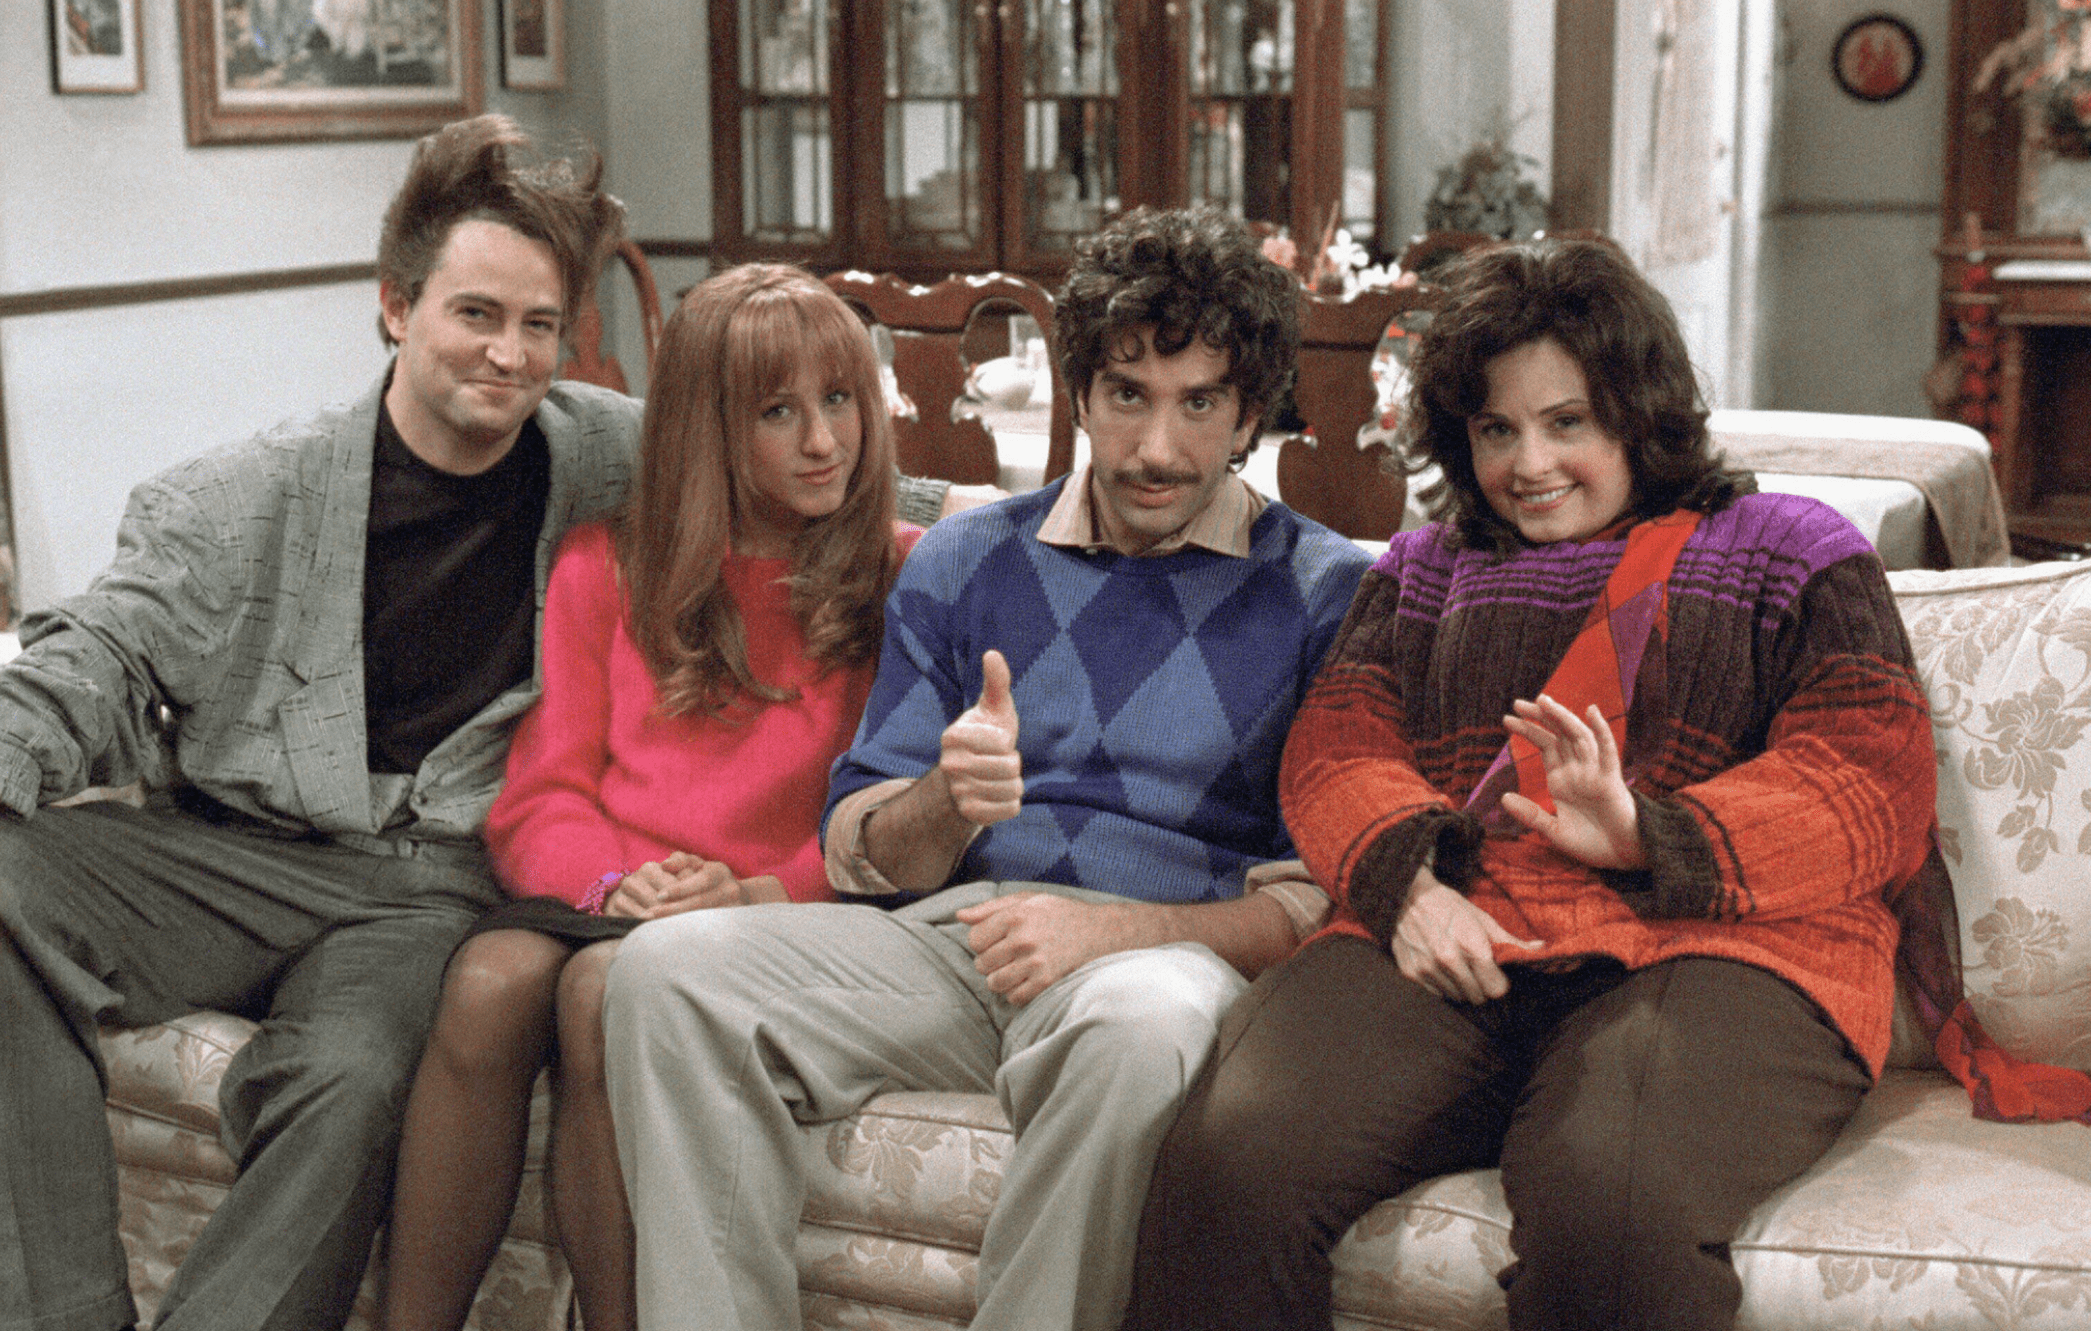 Chandler, Rachel, and the Gellers sit on a couch at the Geller home.